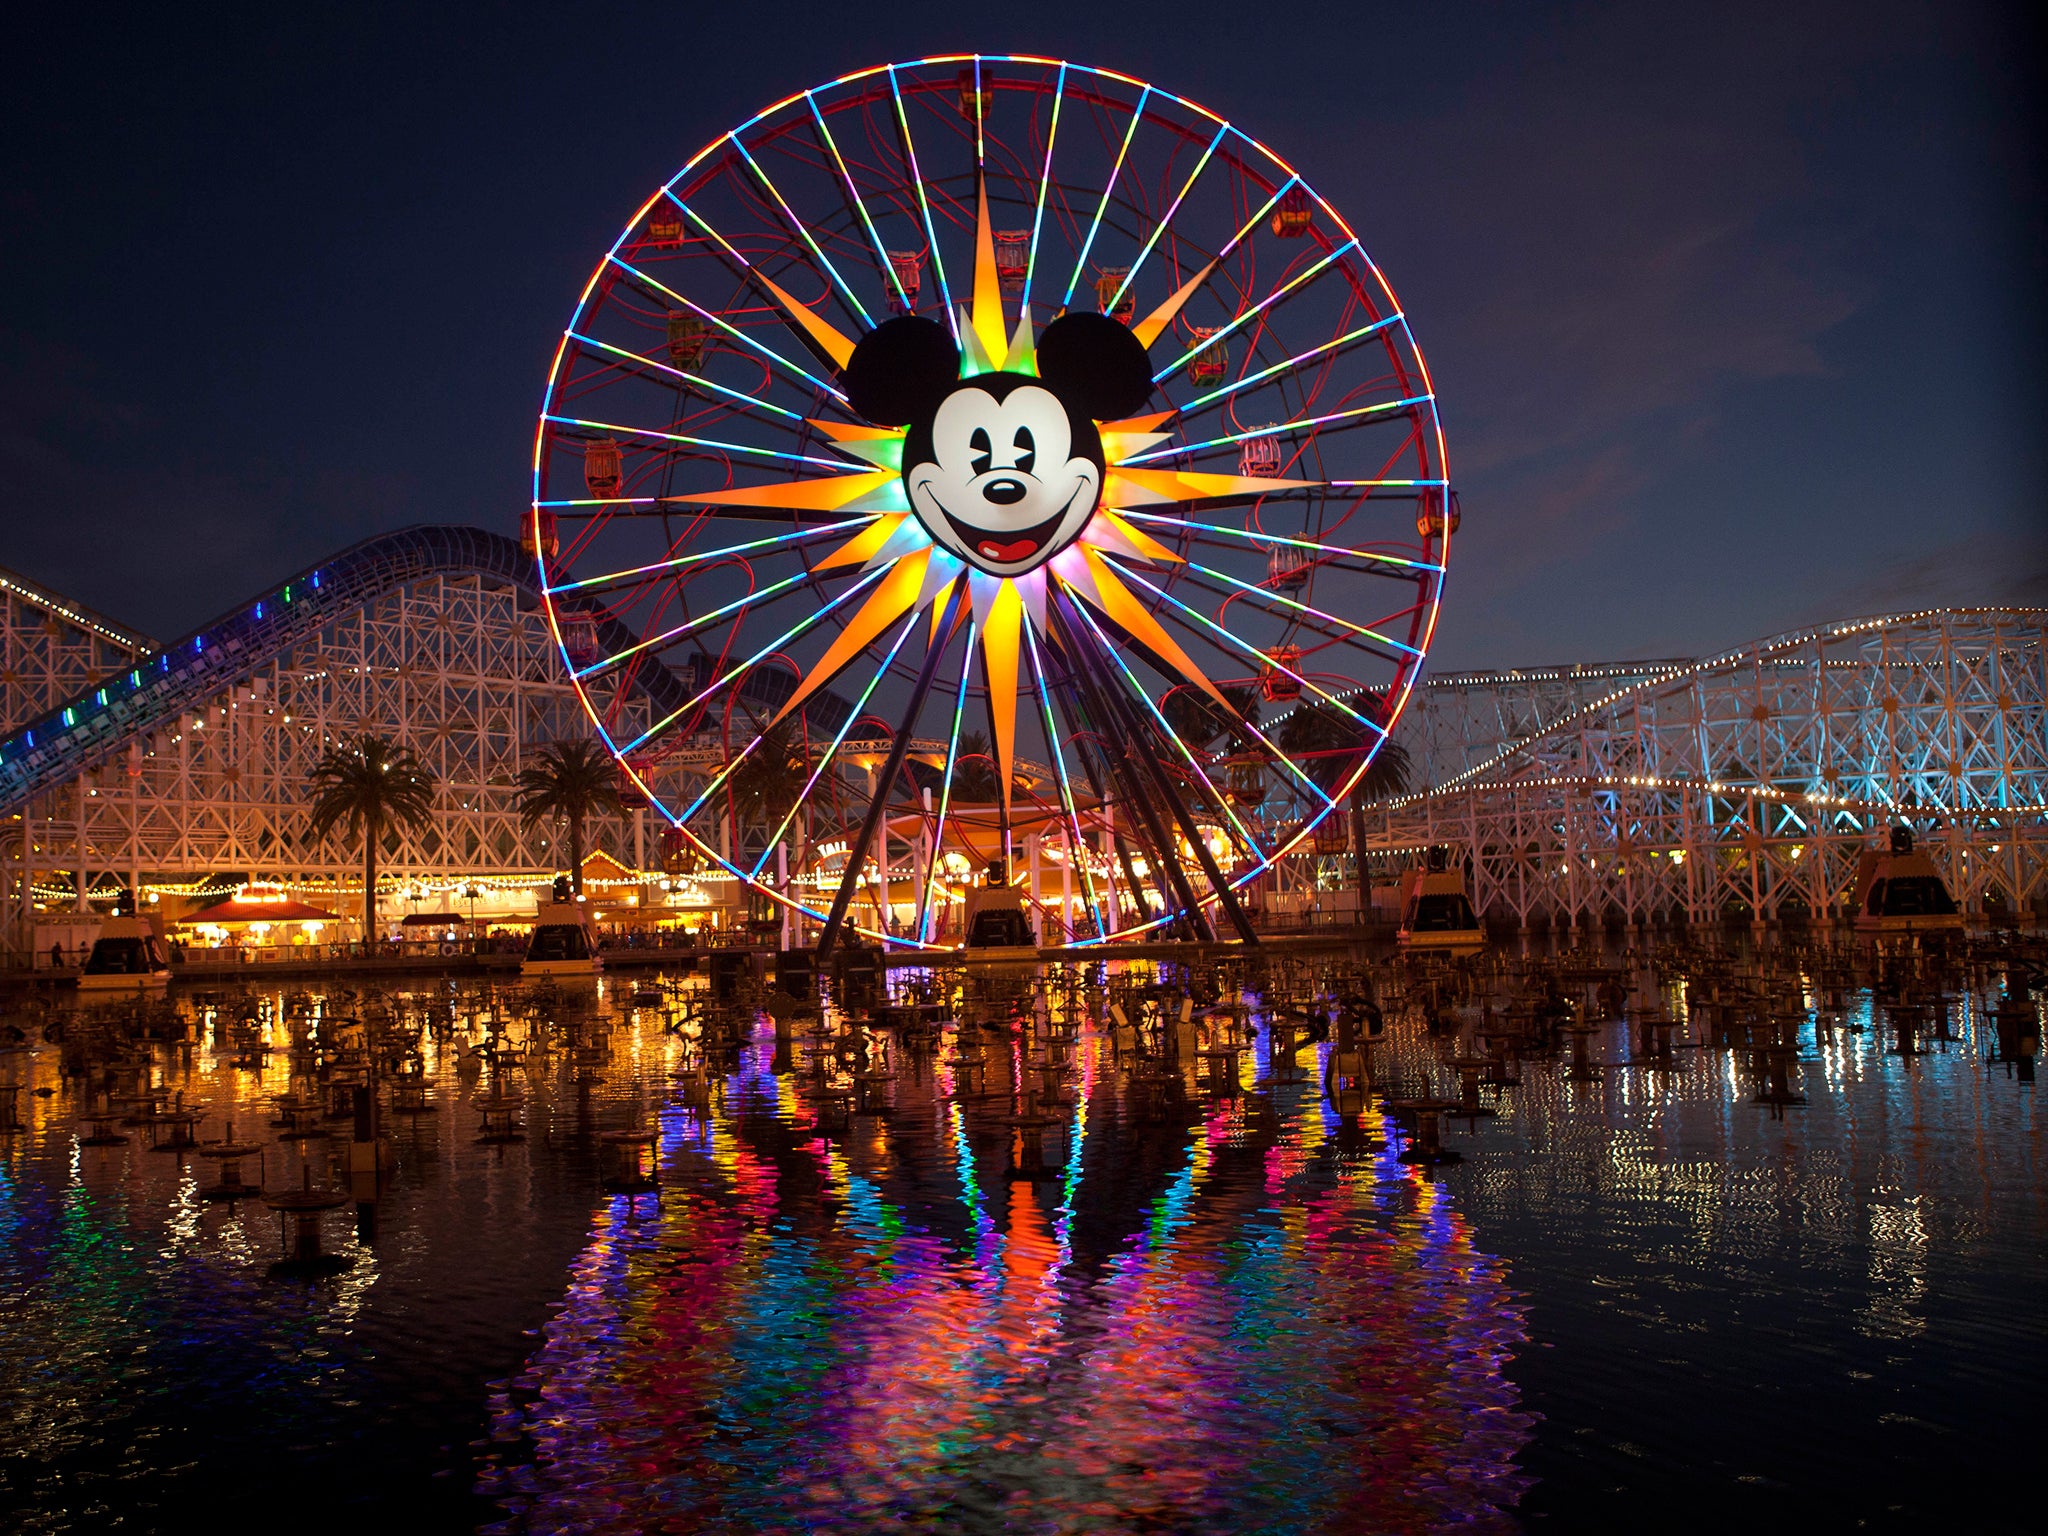 Passengers were left stranded on Mickey's Fun Wheel, at Disney California Adventure Park, after it broke down